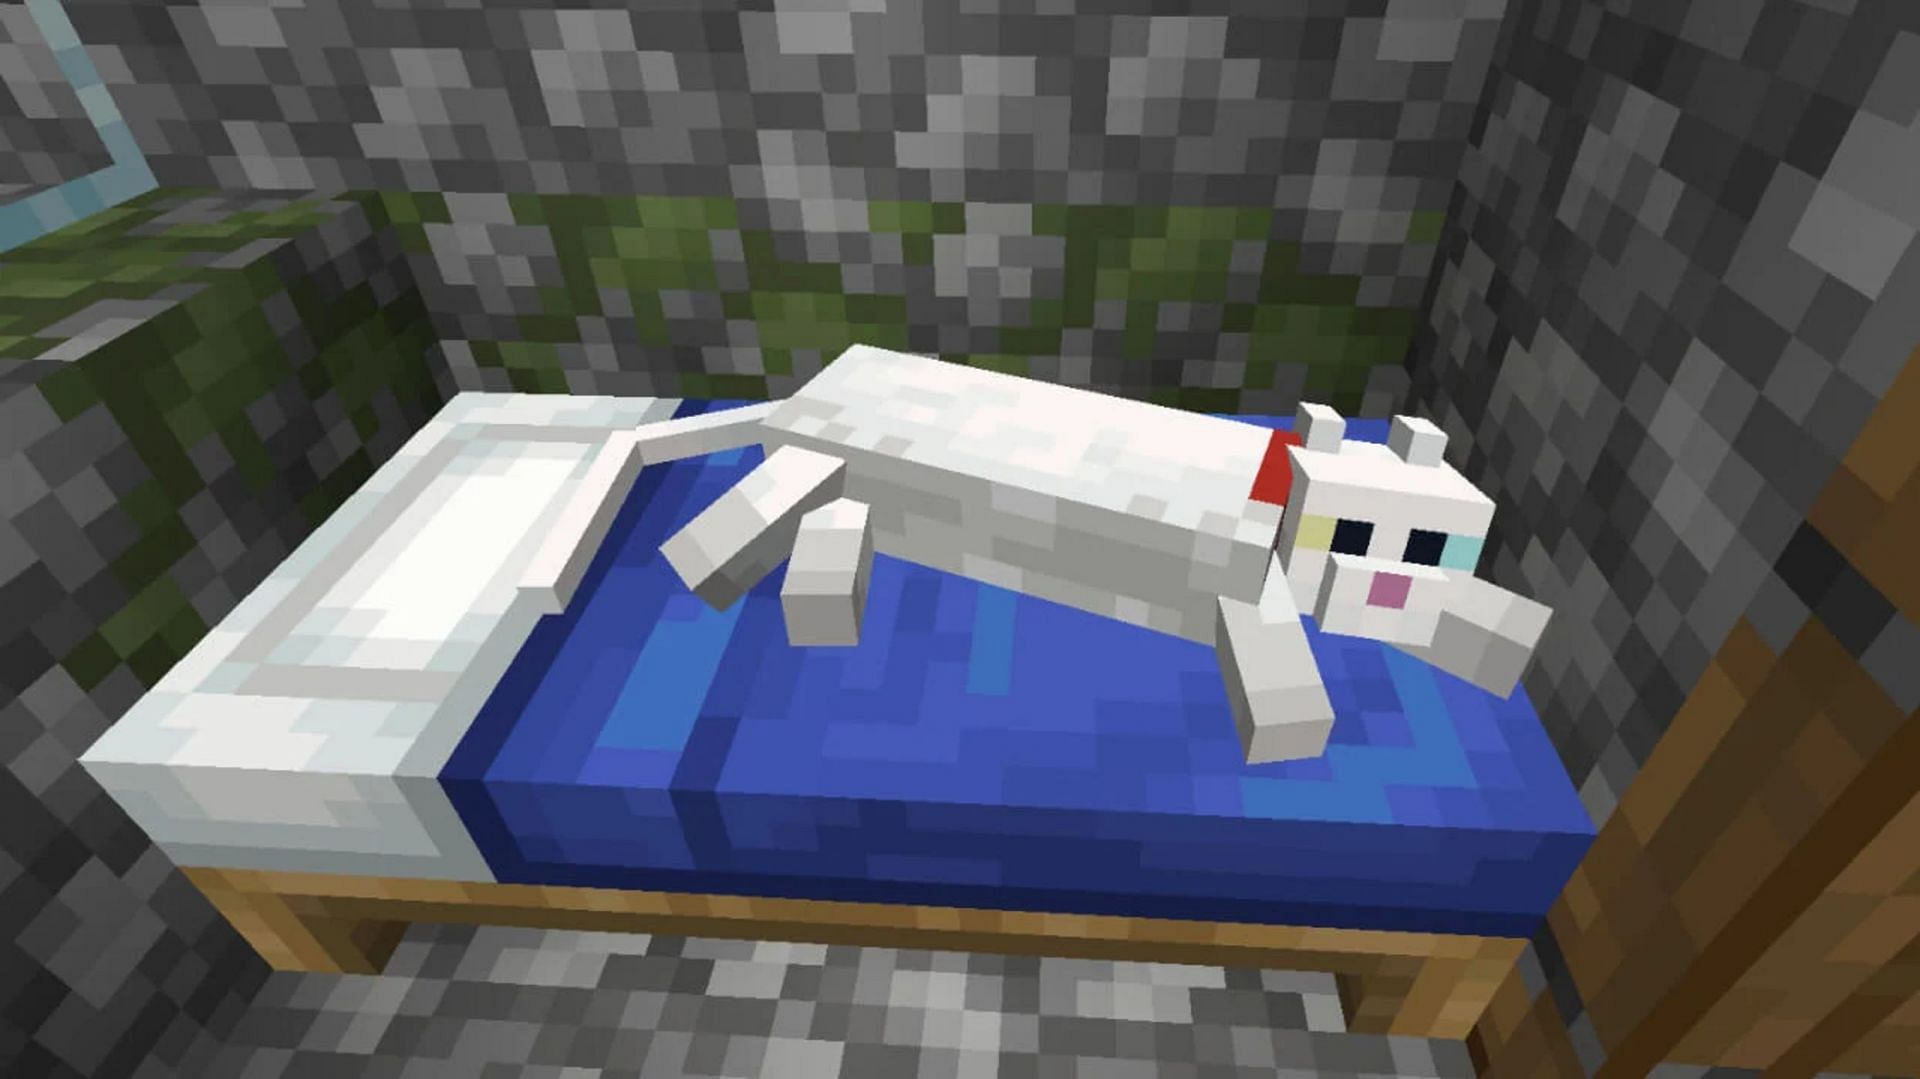 Cats can be quite fond of warm objects like furnaces and beds (Image via Mojang)